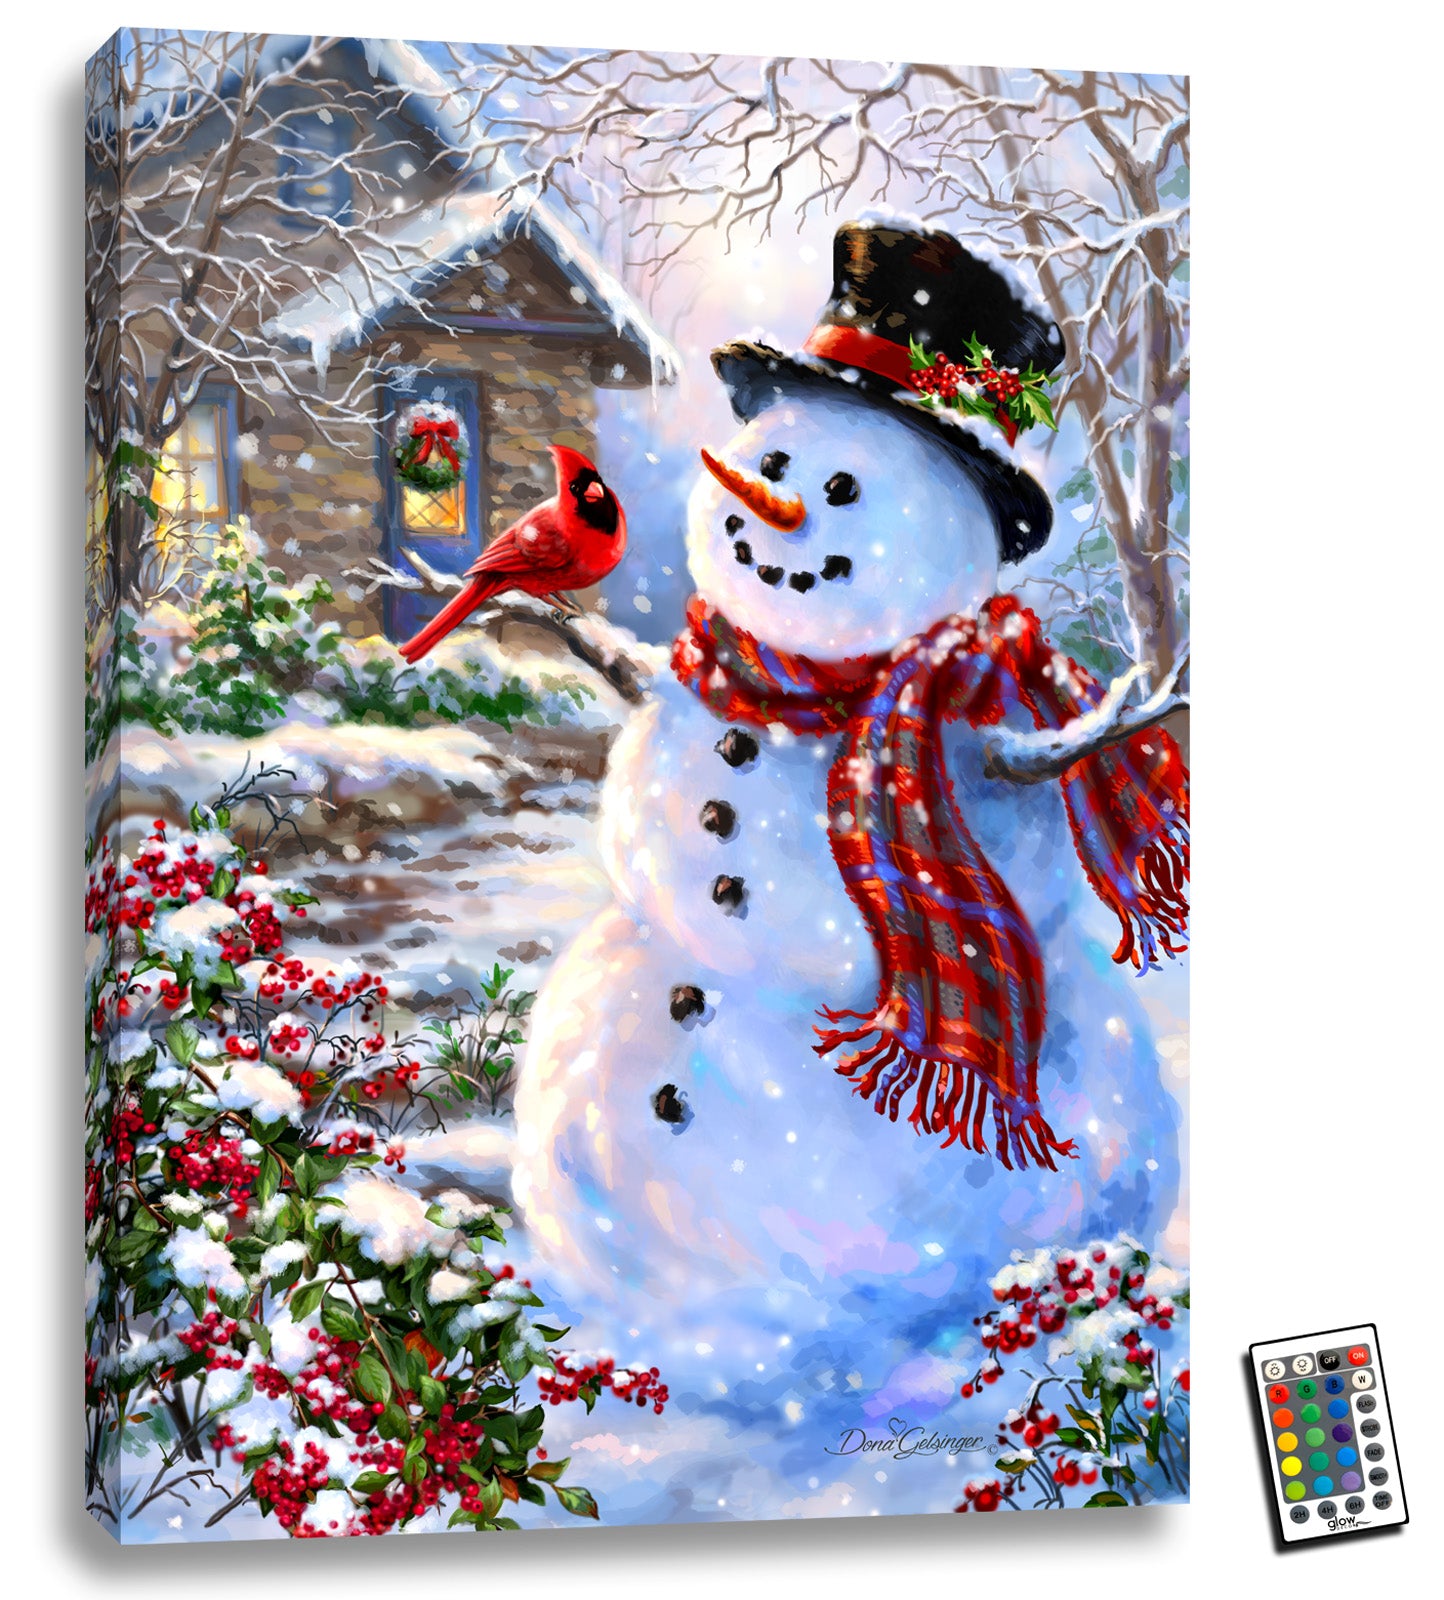 The star of the show is a cheerful snowman, beaming with joy as it stands with a sweet cardinal perched on her arm. Behind them is a charming cottage, complete with a blue door and a welcoming wreath, inviting you to step inside and cozy up by the fire.